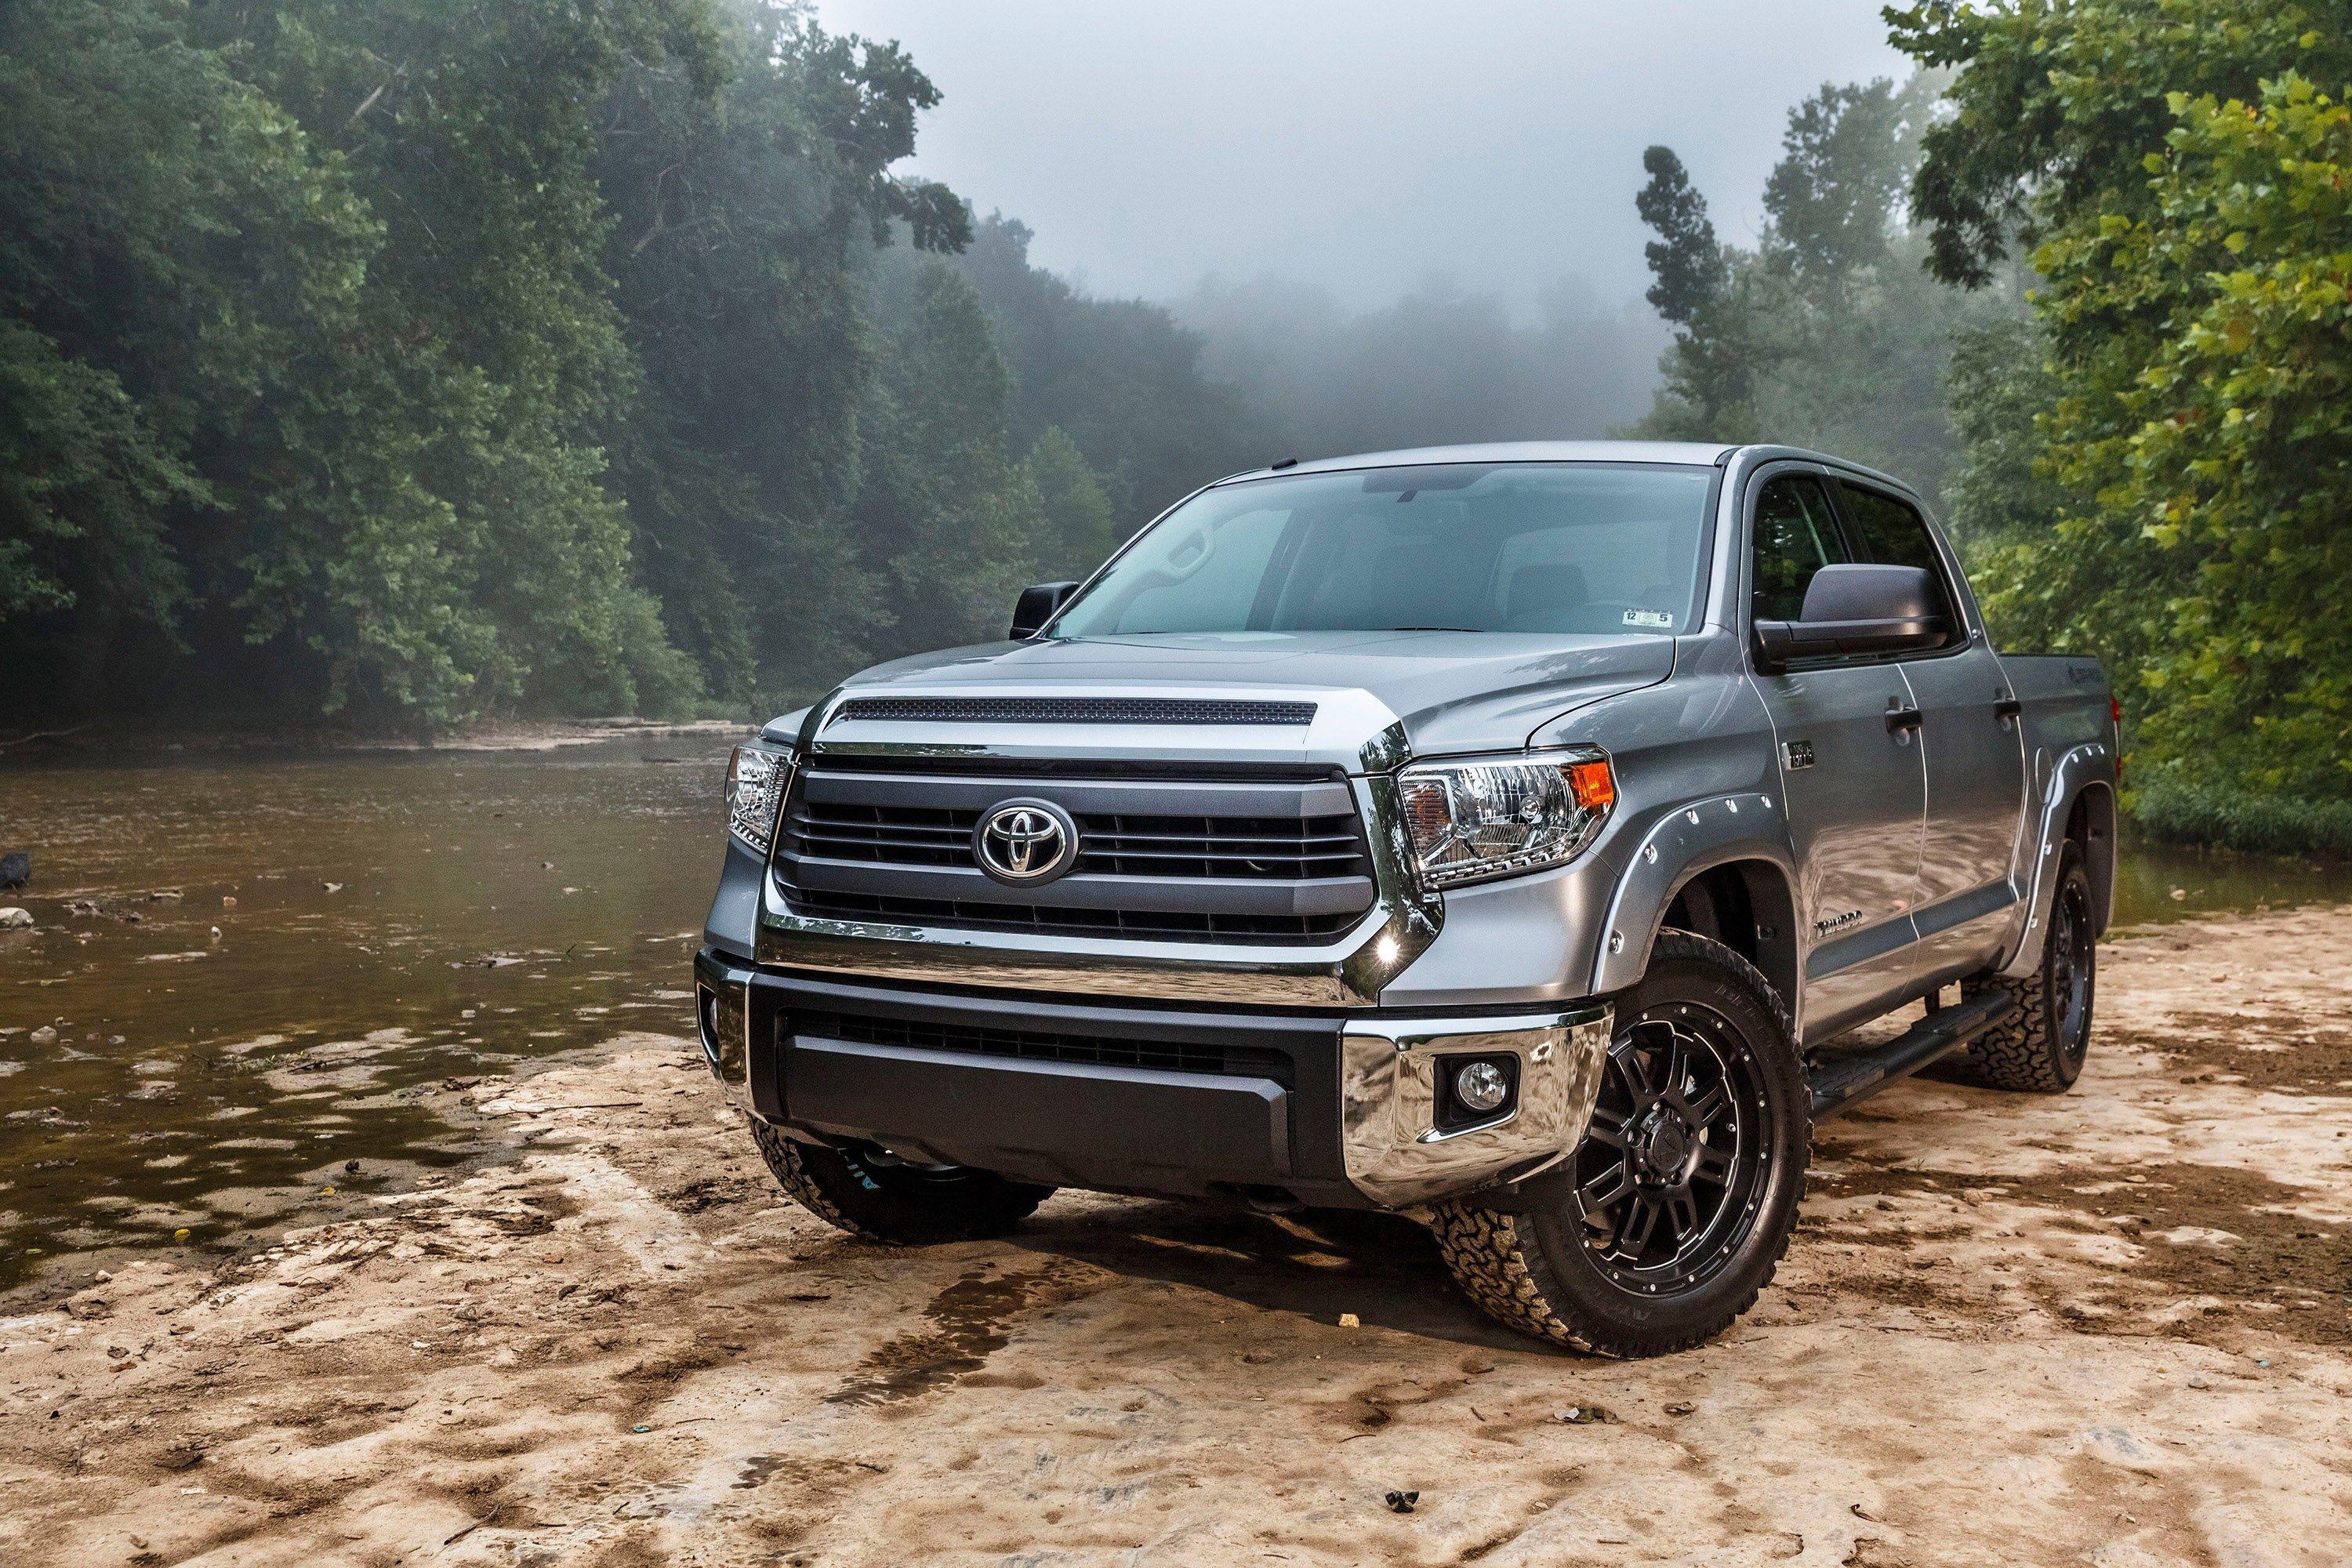 Toyota Tundra Hd Wallpapers Top Free Toyota Tundra Hd Backgrounds Wallpaperaccess